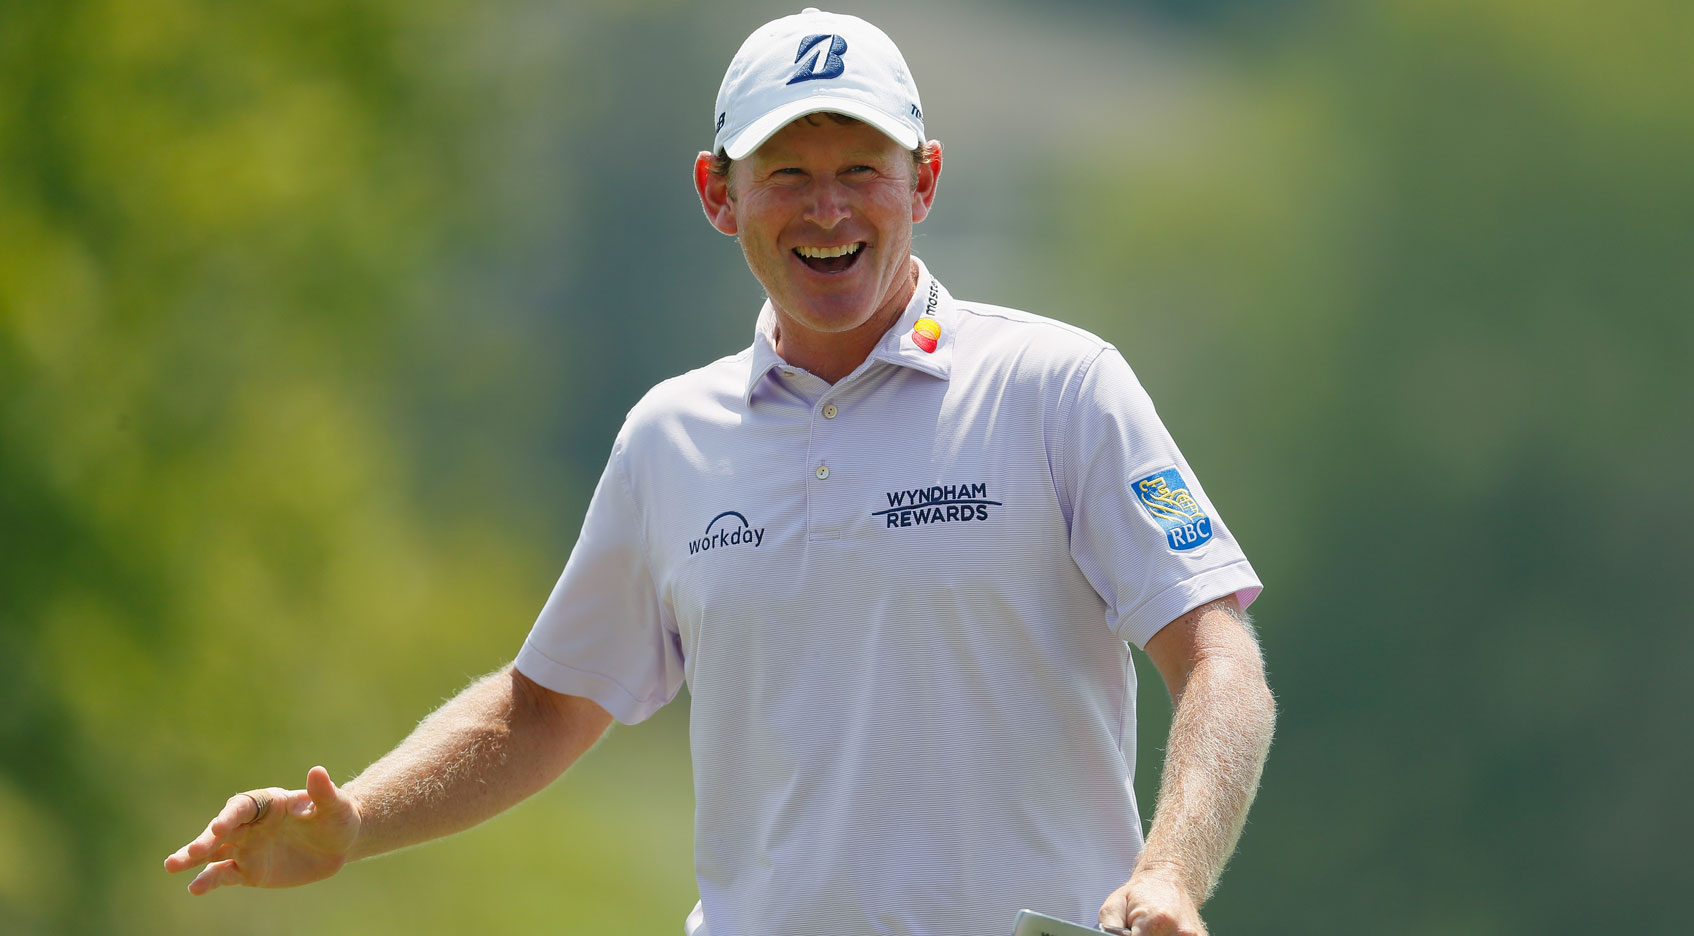 How it has changed since his 2018 Wyndham Championship win